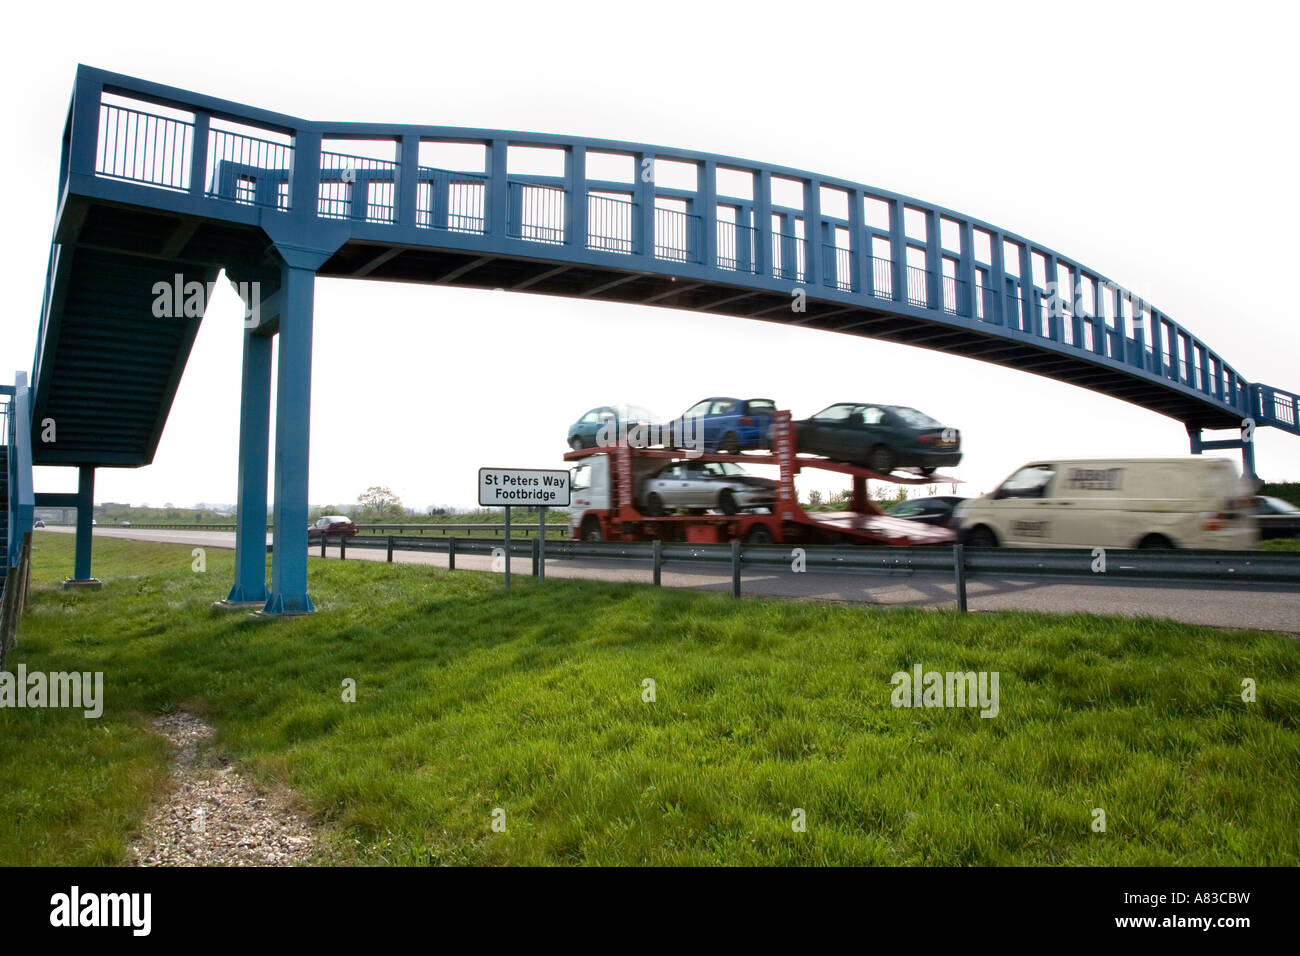 THE A130 ROAD VIEWED OVER ST PETERS WAY FOOTBRIDGE NEAR CHELMSFORD, ESSEX, ENGLAND. Stock Photo